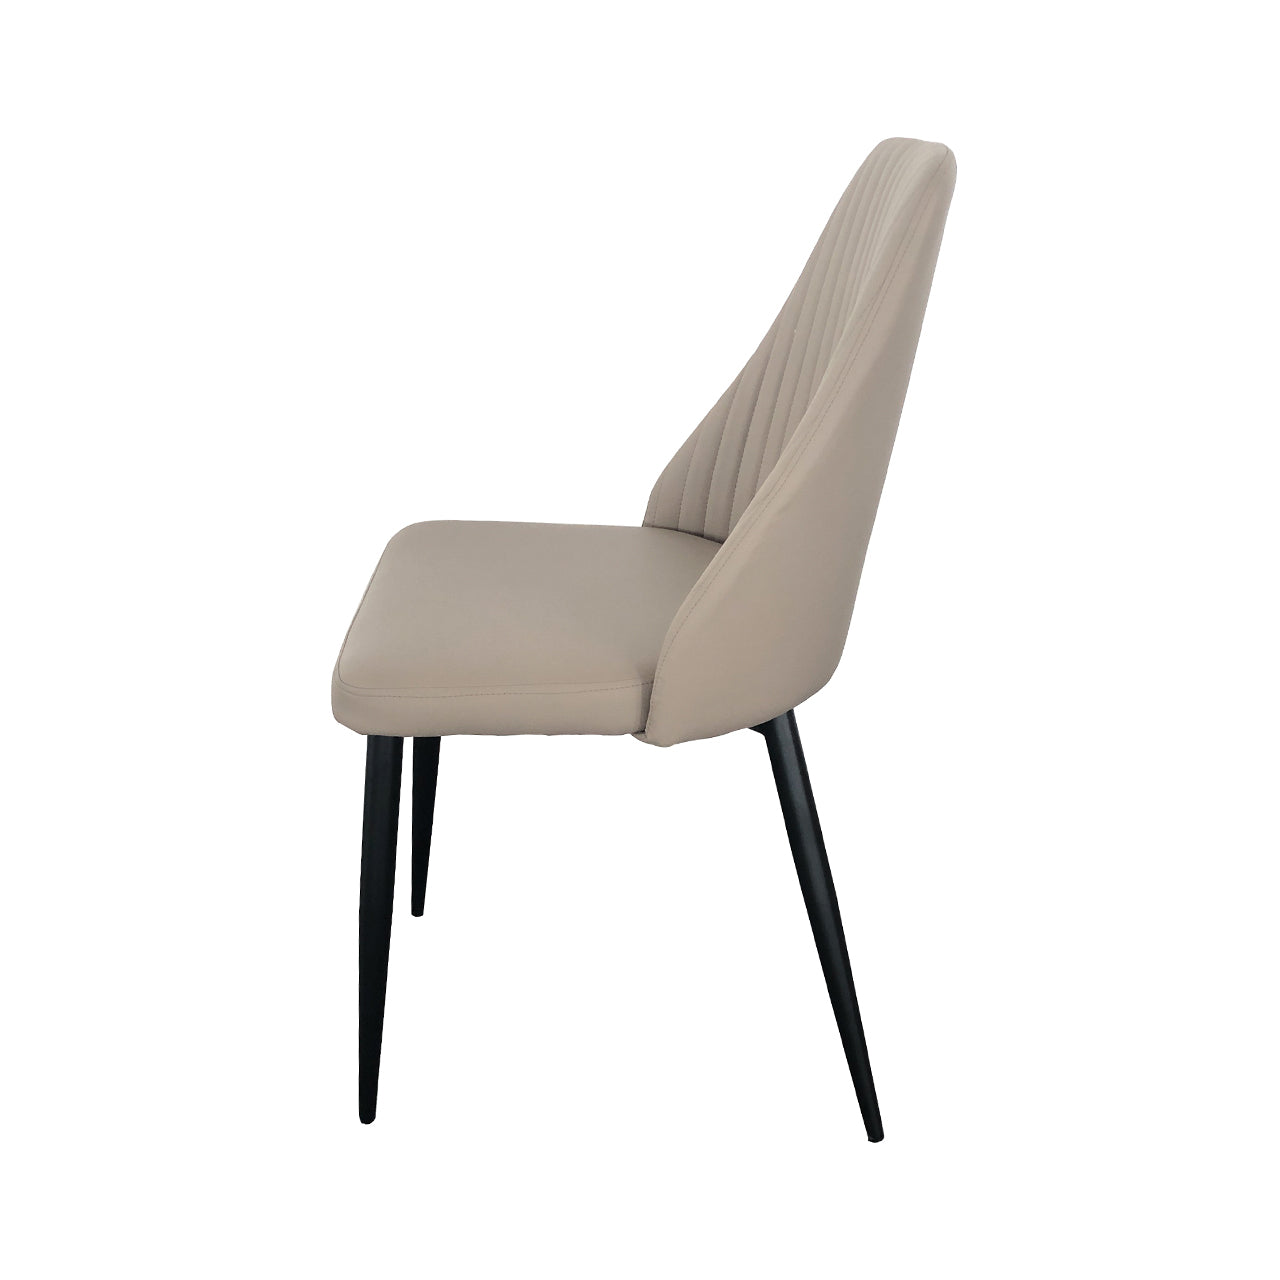 PU leather dining chair in taupe color